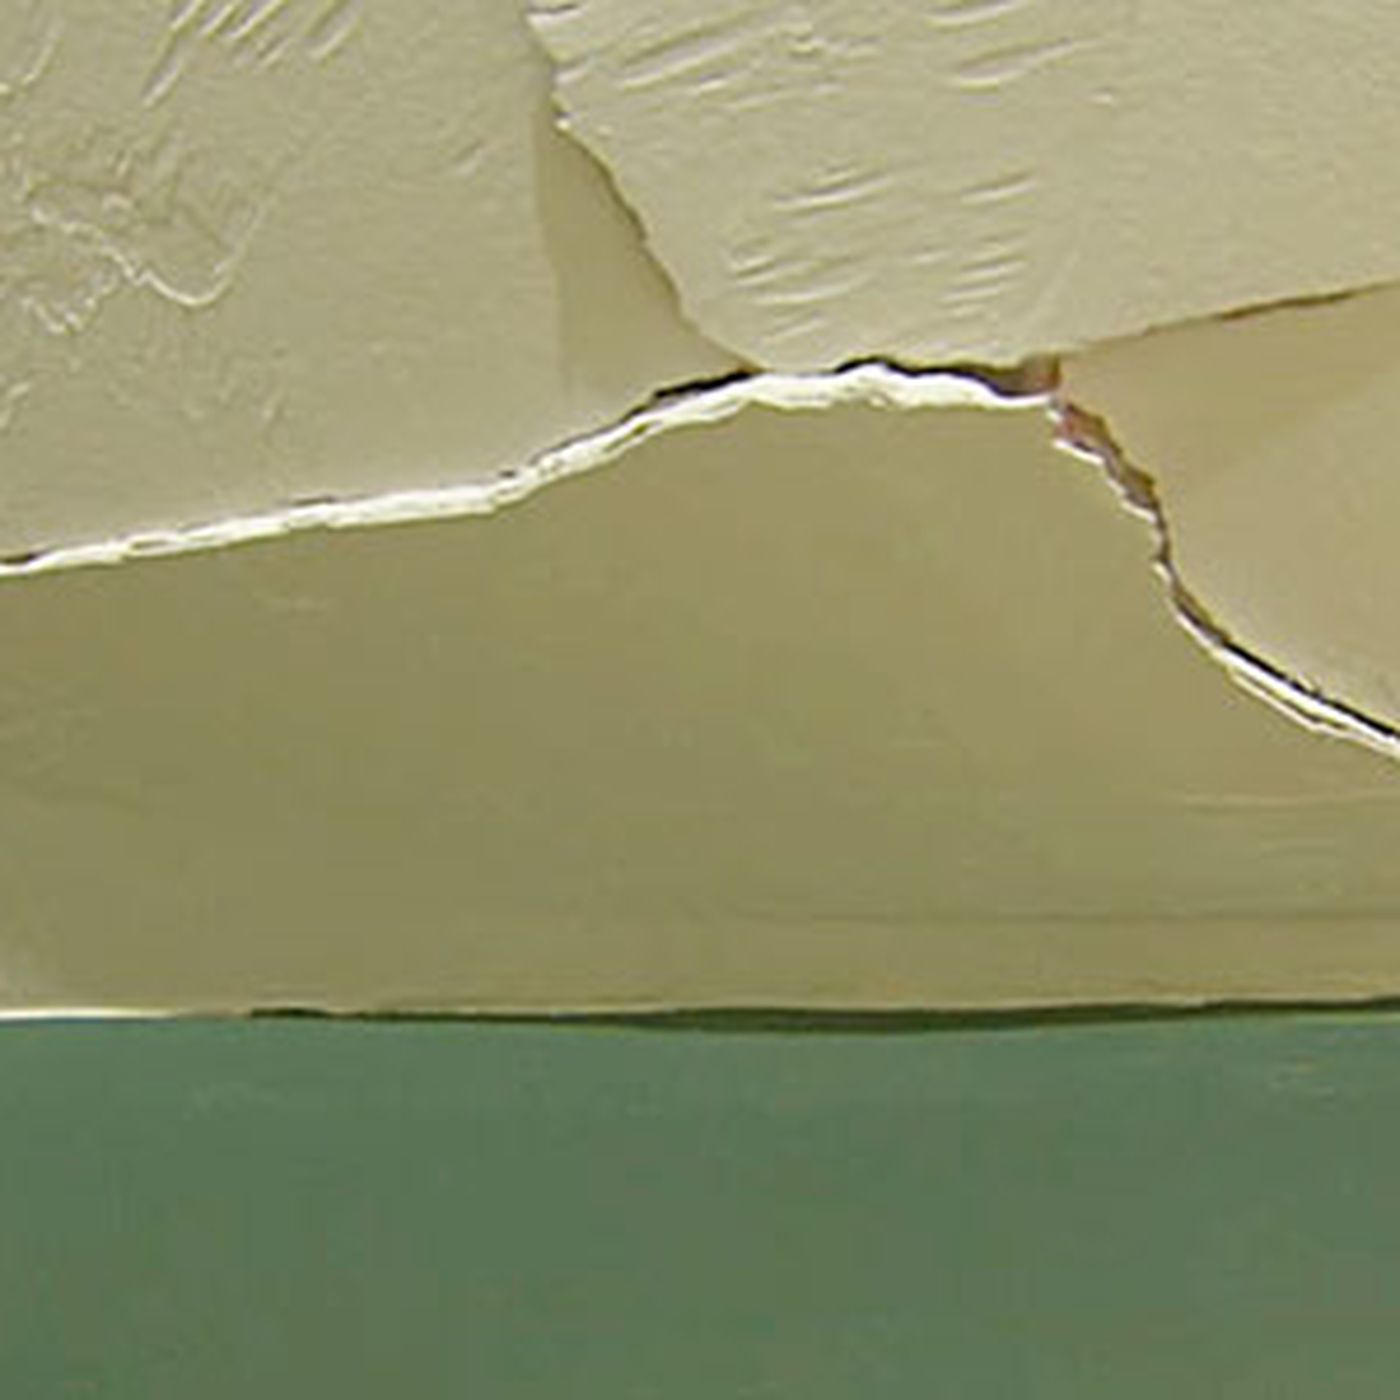 Drywall Ceiling Repair (VIDEO) & Instructions - This Old House